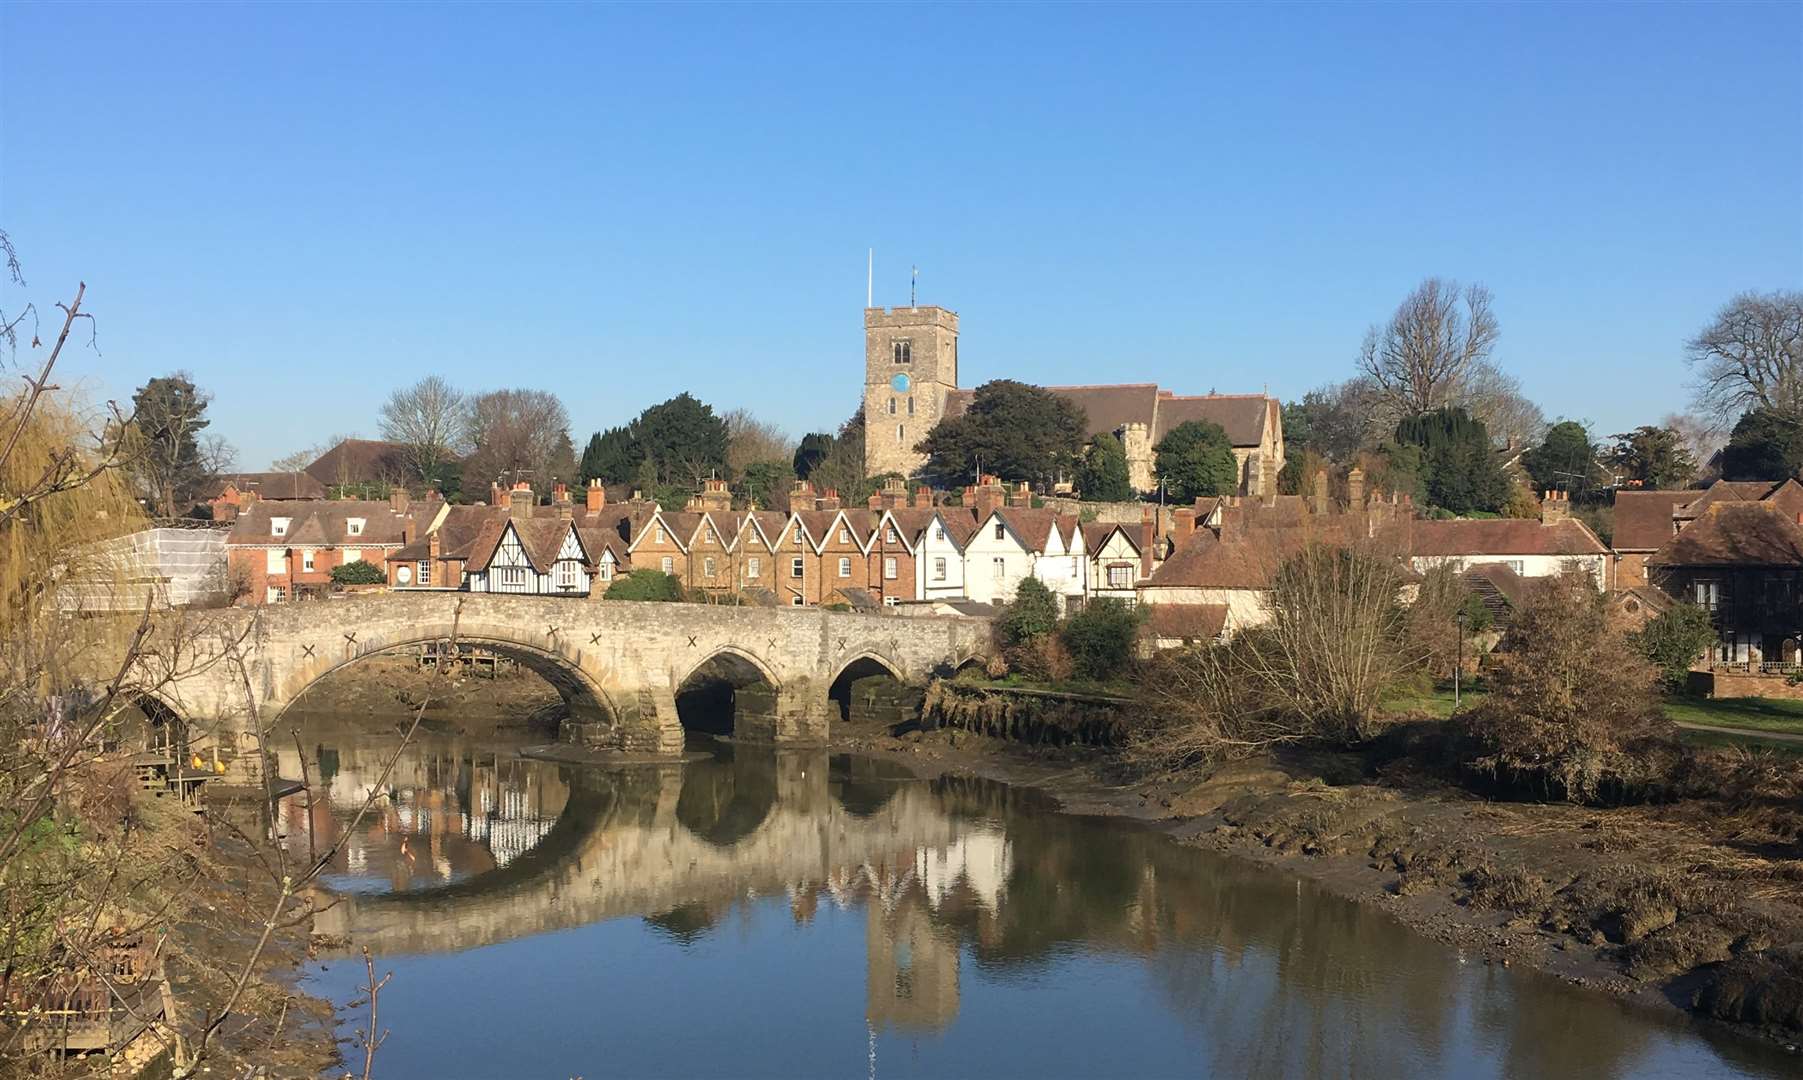 Sunny weather in Aylesford (8468240)